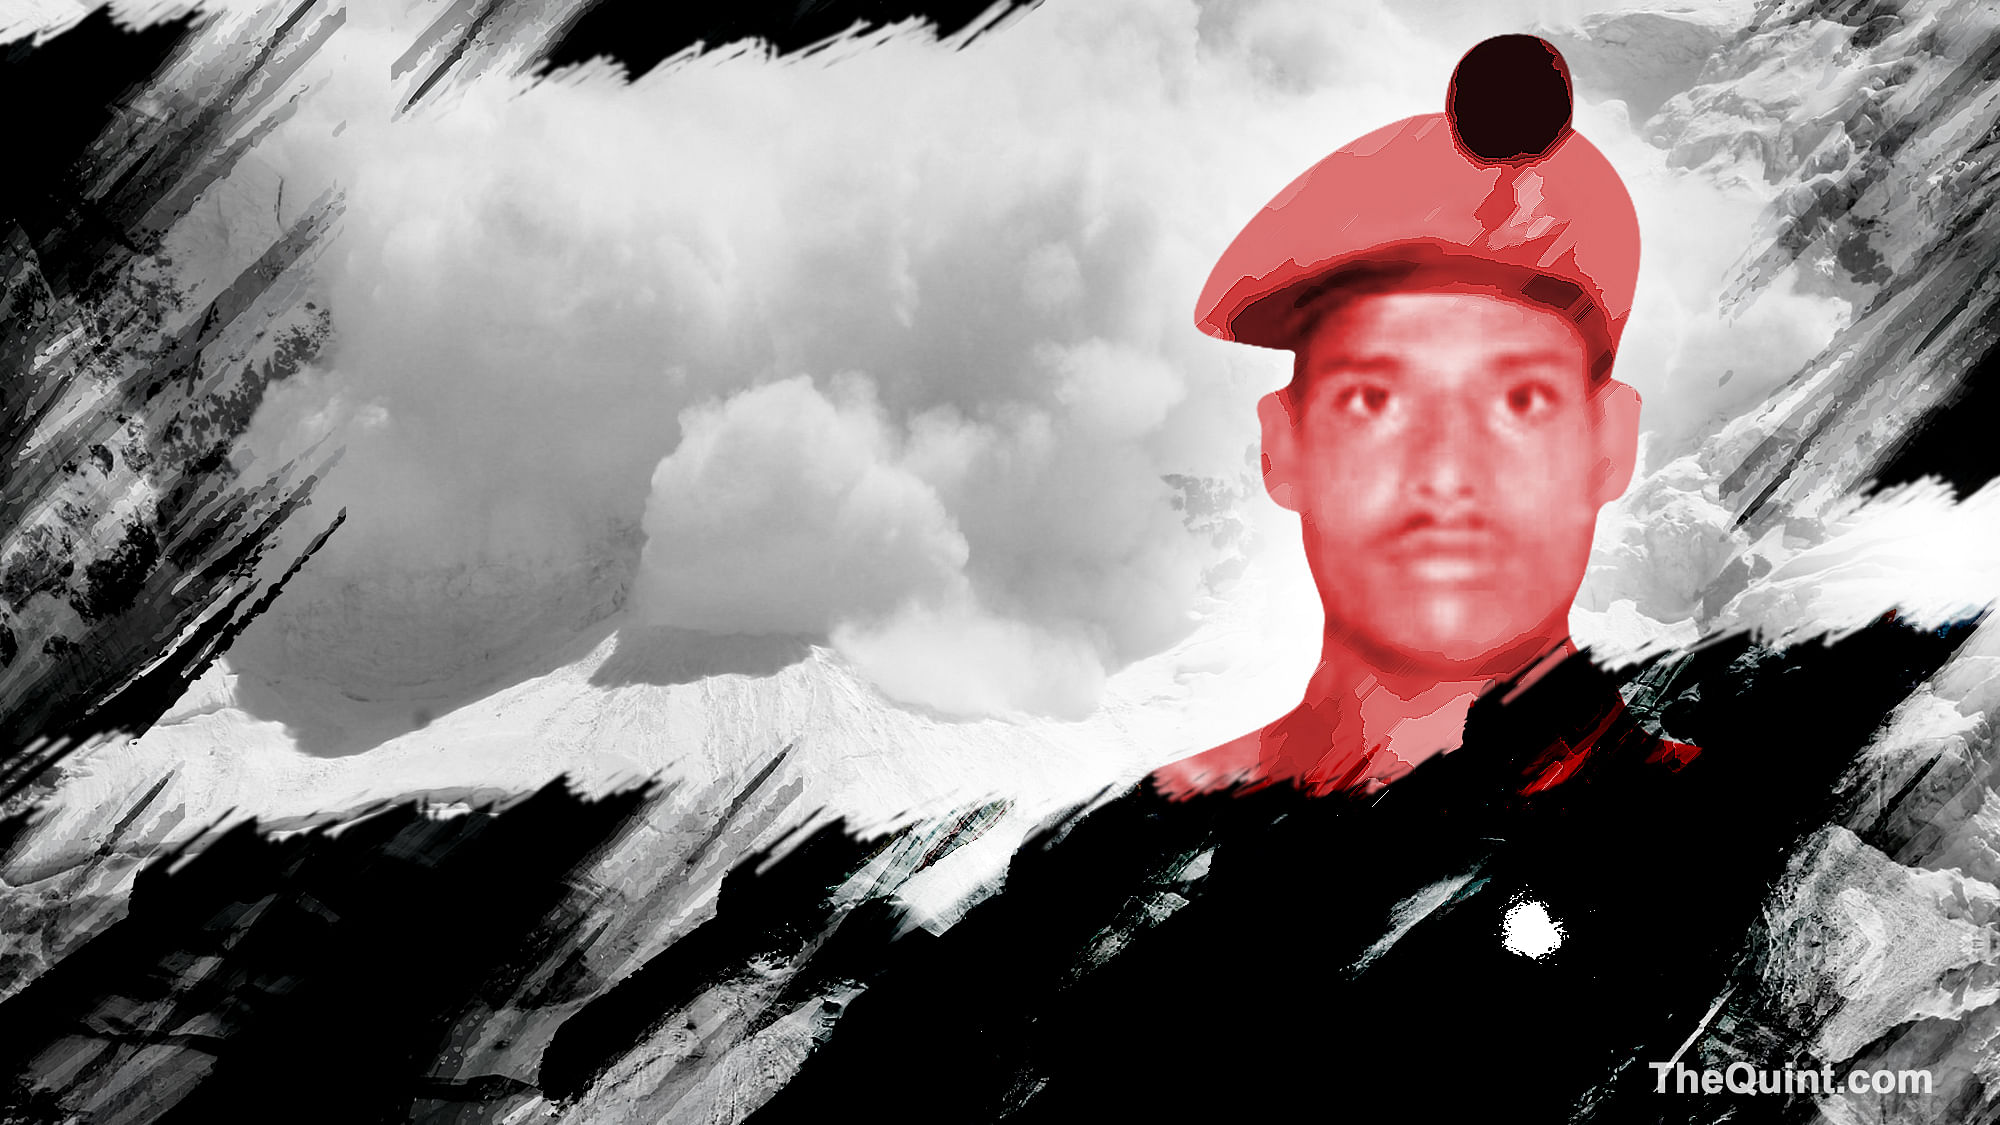 Lance Naik Hanumanthappa found alive after Siachen avalanche accident. (Photo: Hardeep Singh/<b>The Quint</b>)